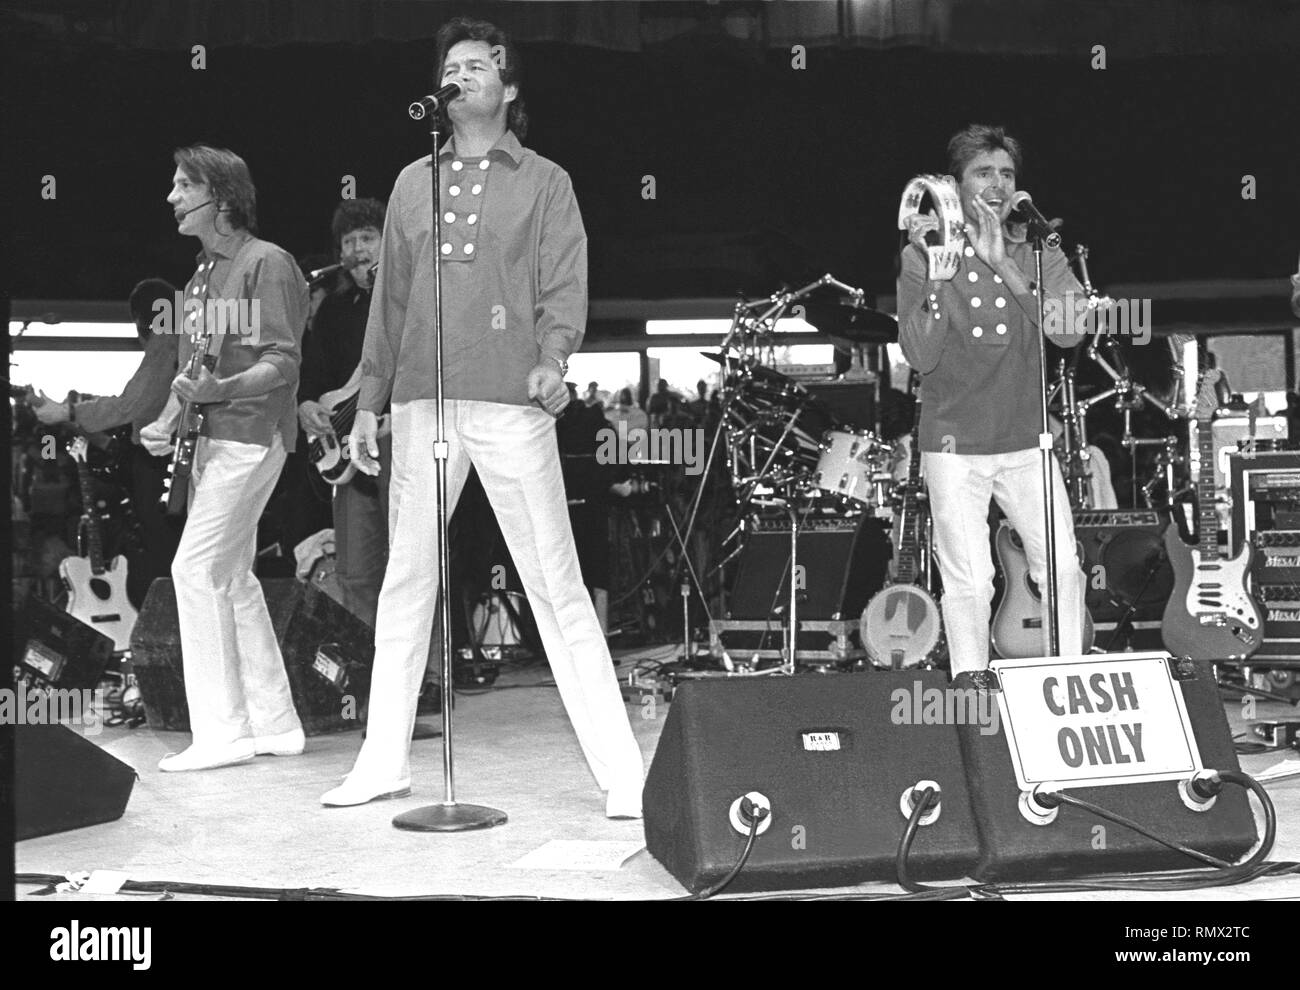 The Monkees are shown performing on stage during a 'live' concert appearance. Stock Photo